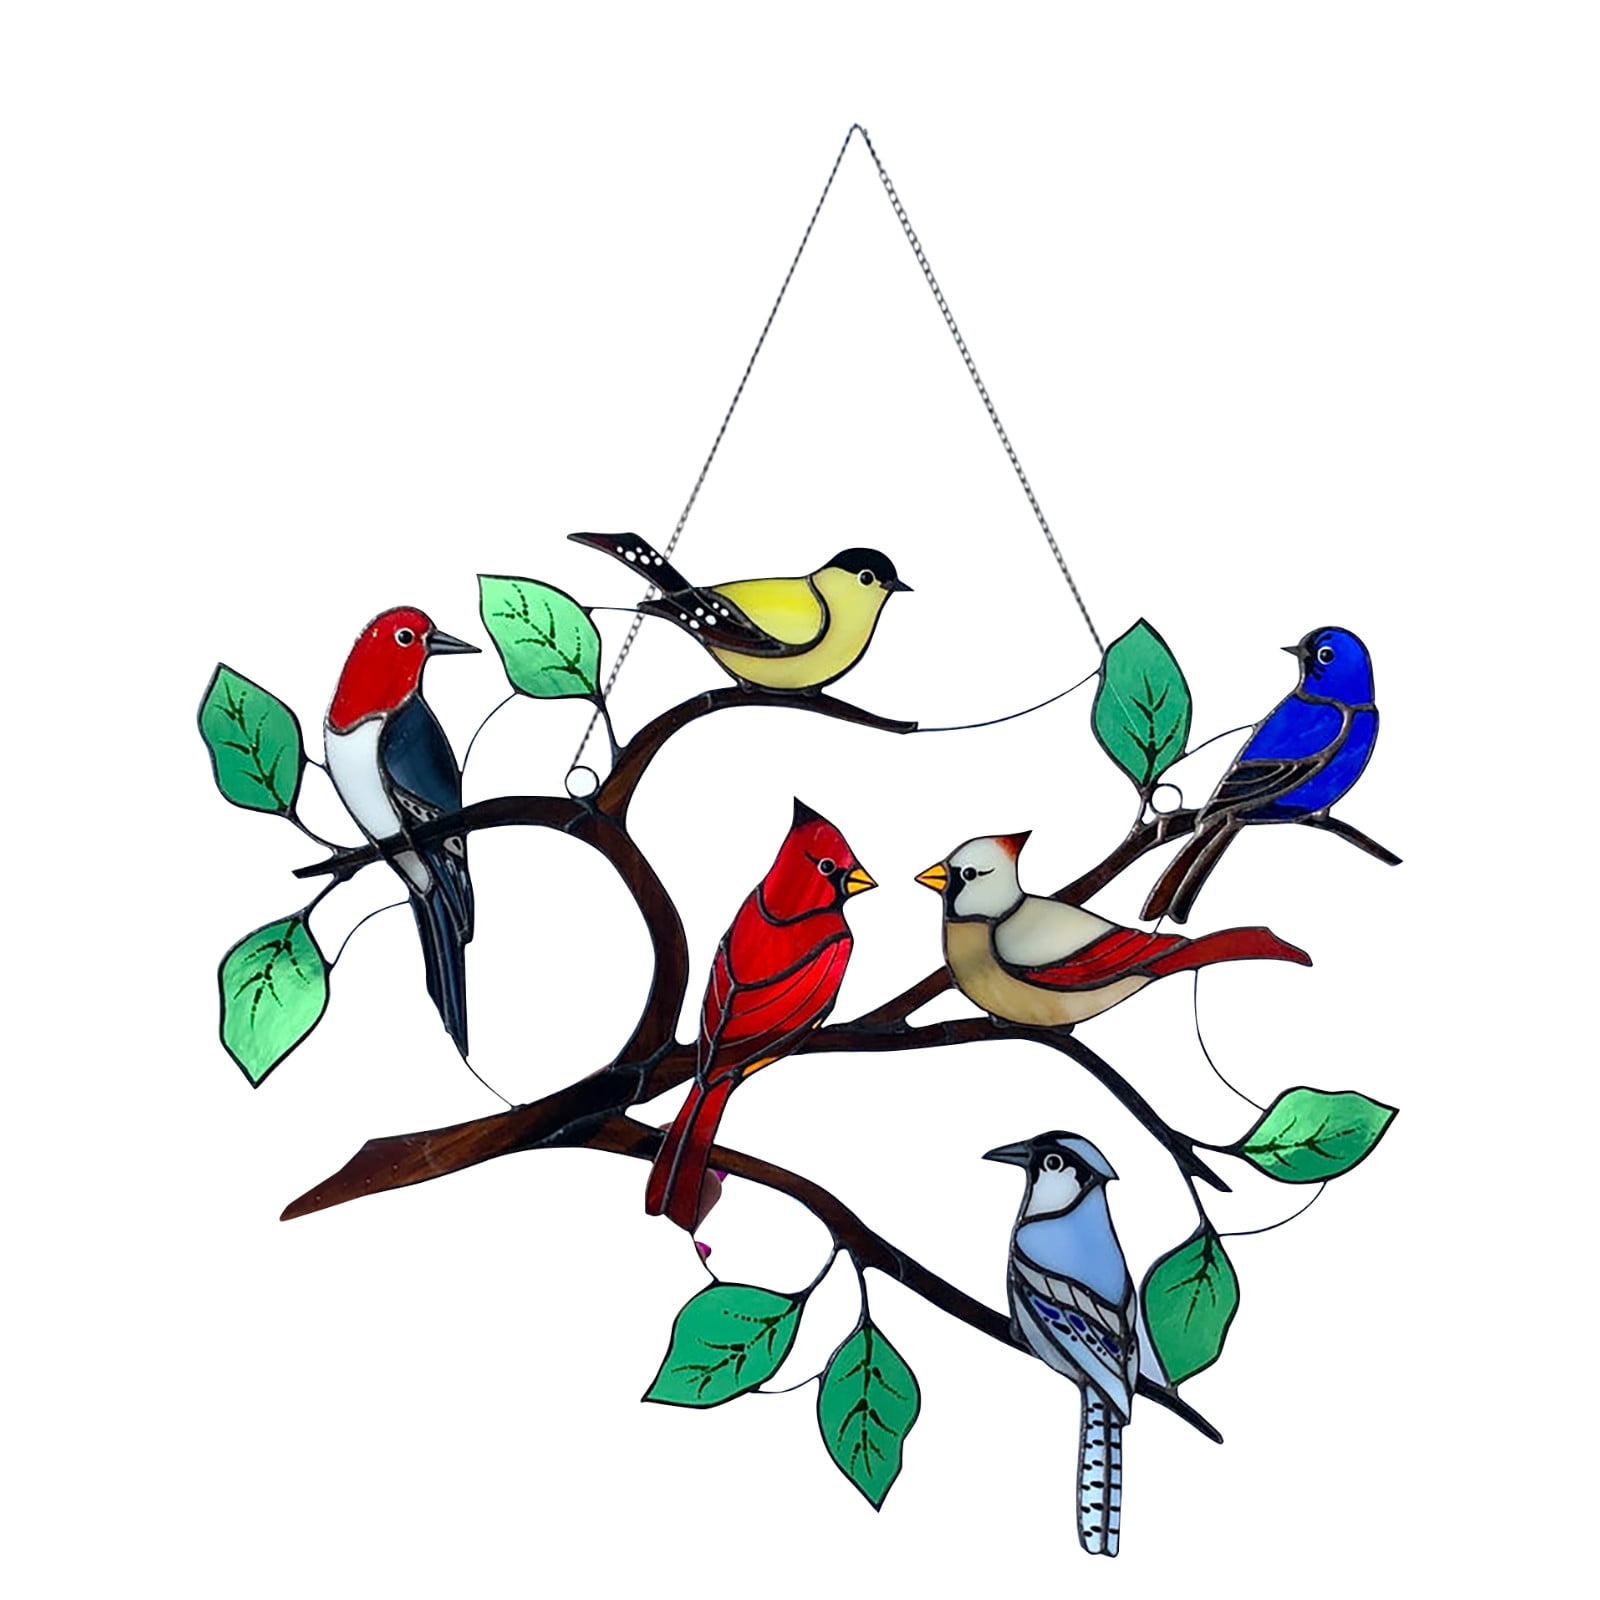 Birds Stained Stainless Steel Window Hangings Creative Window Panel Stainless Steel Birds Suncatcher for Home Room 7 Birds Design